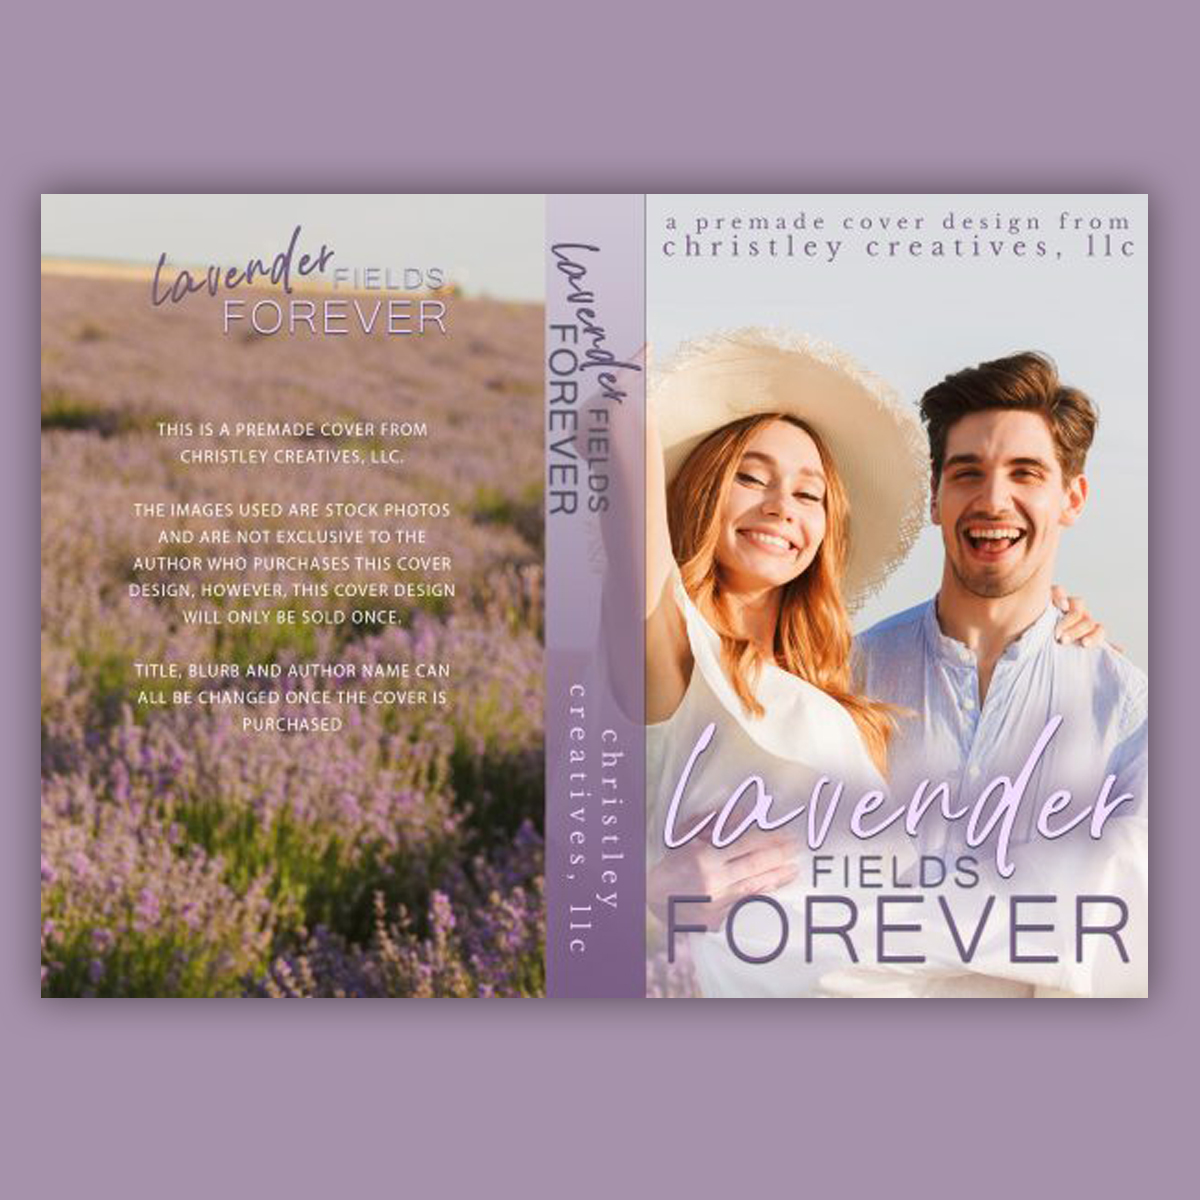 Lavender Fields Forever - Premade Contemporary Romance Book Cover from Christley Creatives